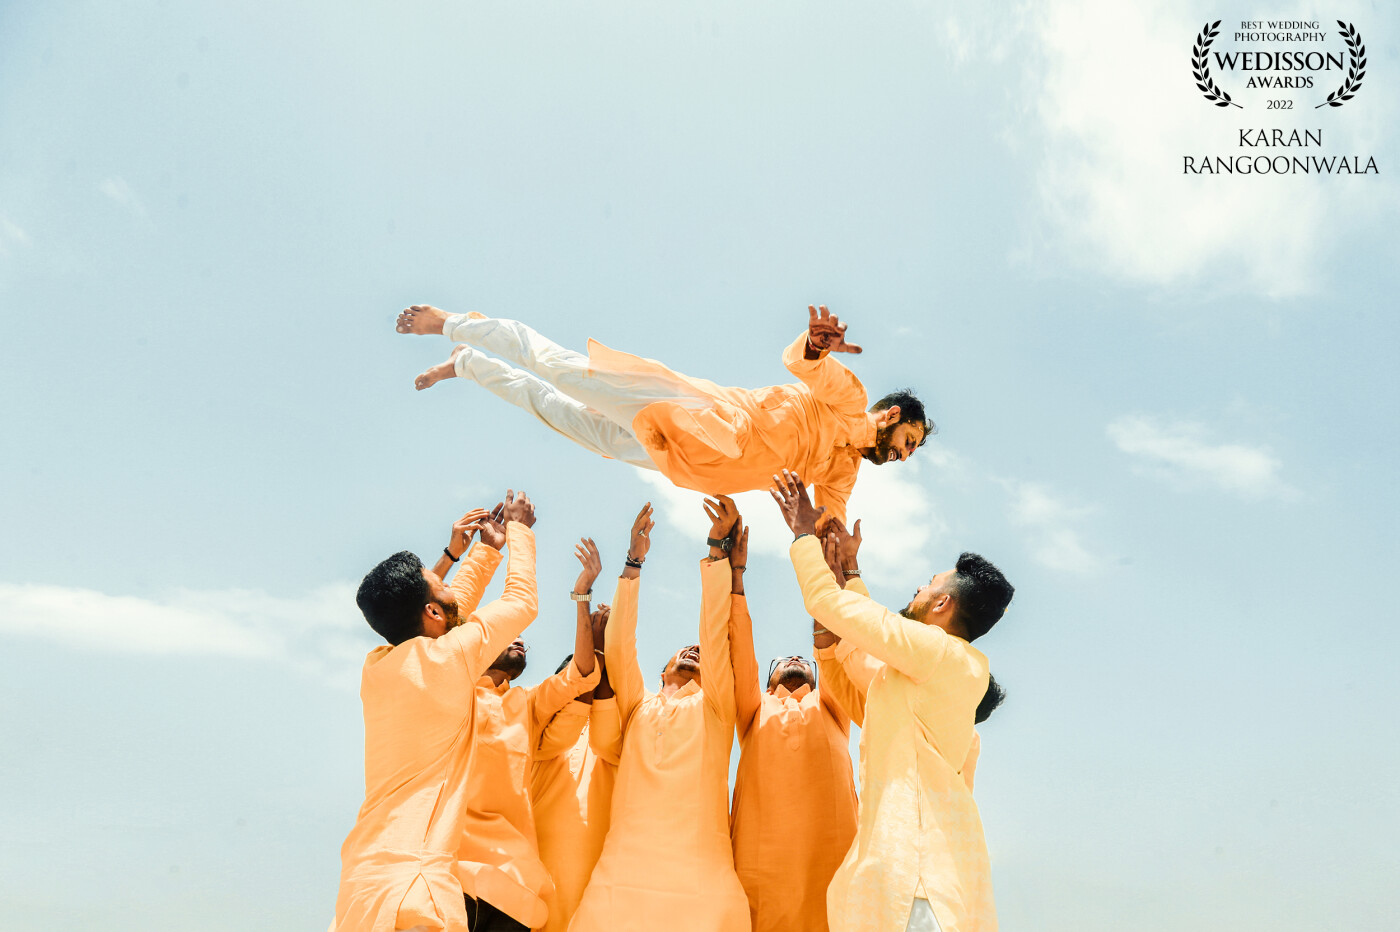 The Haldi ceremony is a beautiful mix of traditions and a fun day out. However, people often tend to ignore the traditions, in favour of a peppy round of fun.